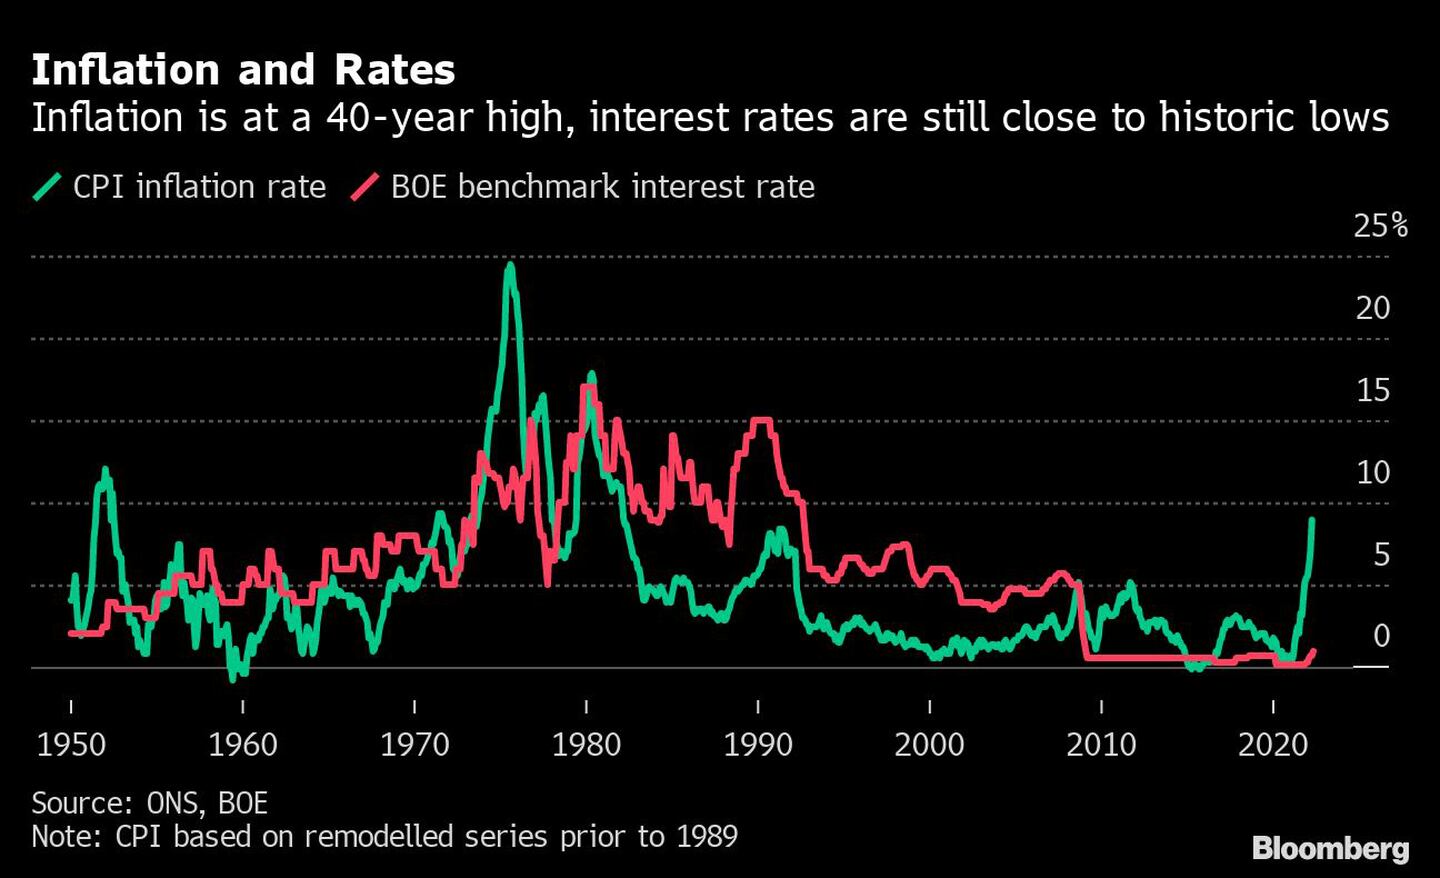 Inflation and Rates | Inflation is at a 40-year high, interest rates are still close to historic lowsdfd